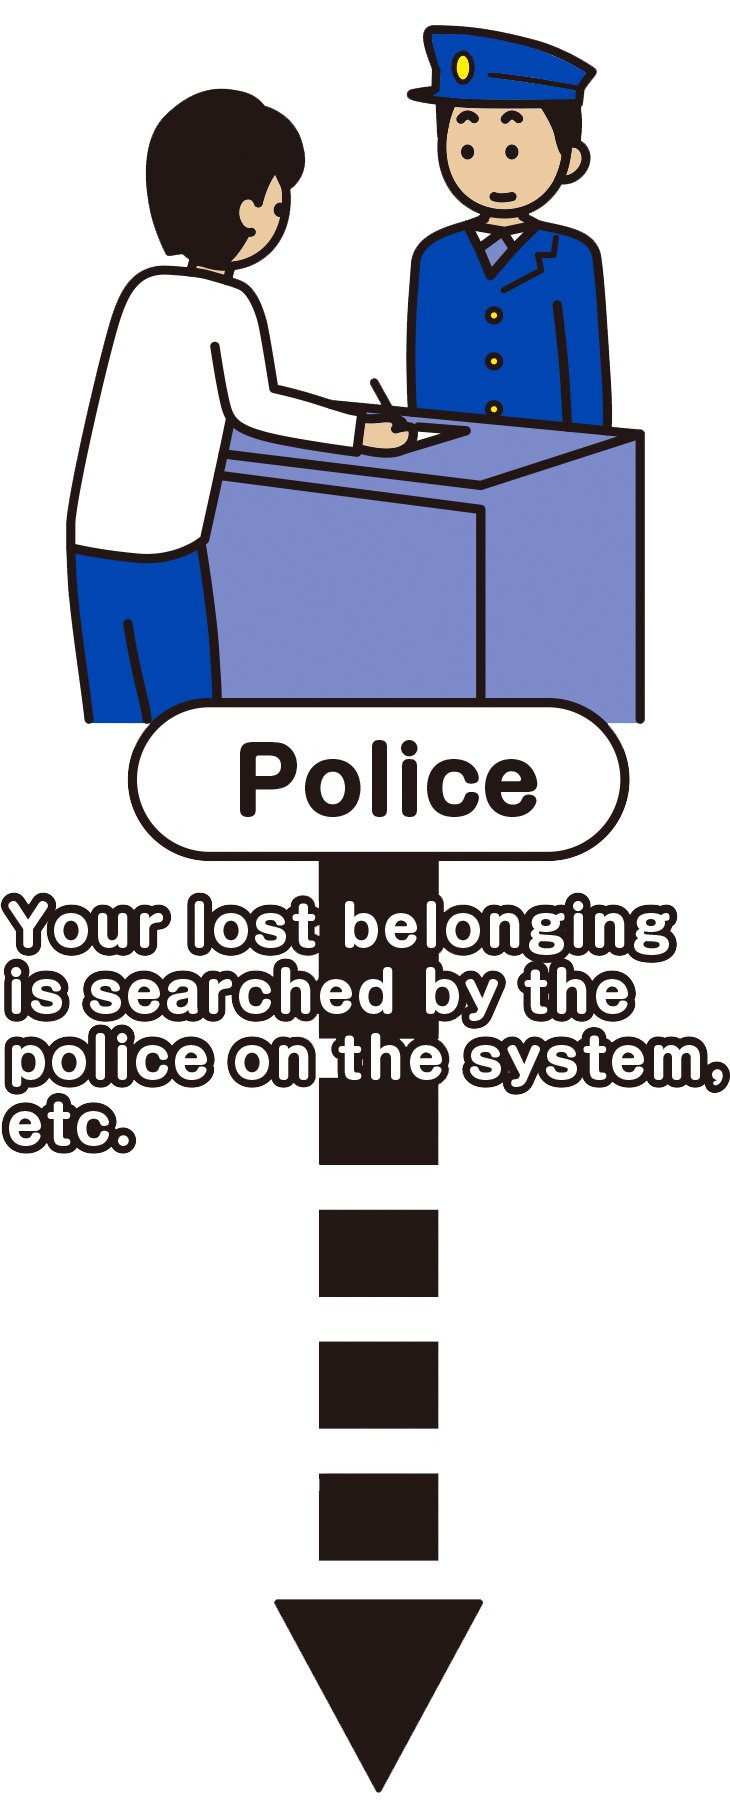 Submit “The Lost Property Report” at a police station or a police box.